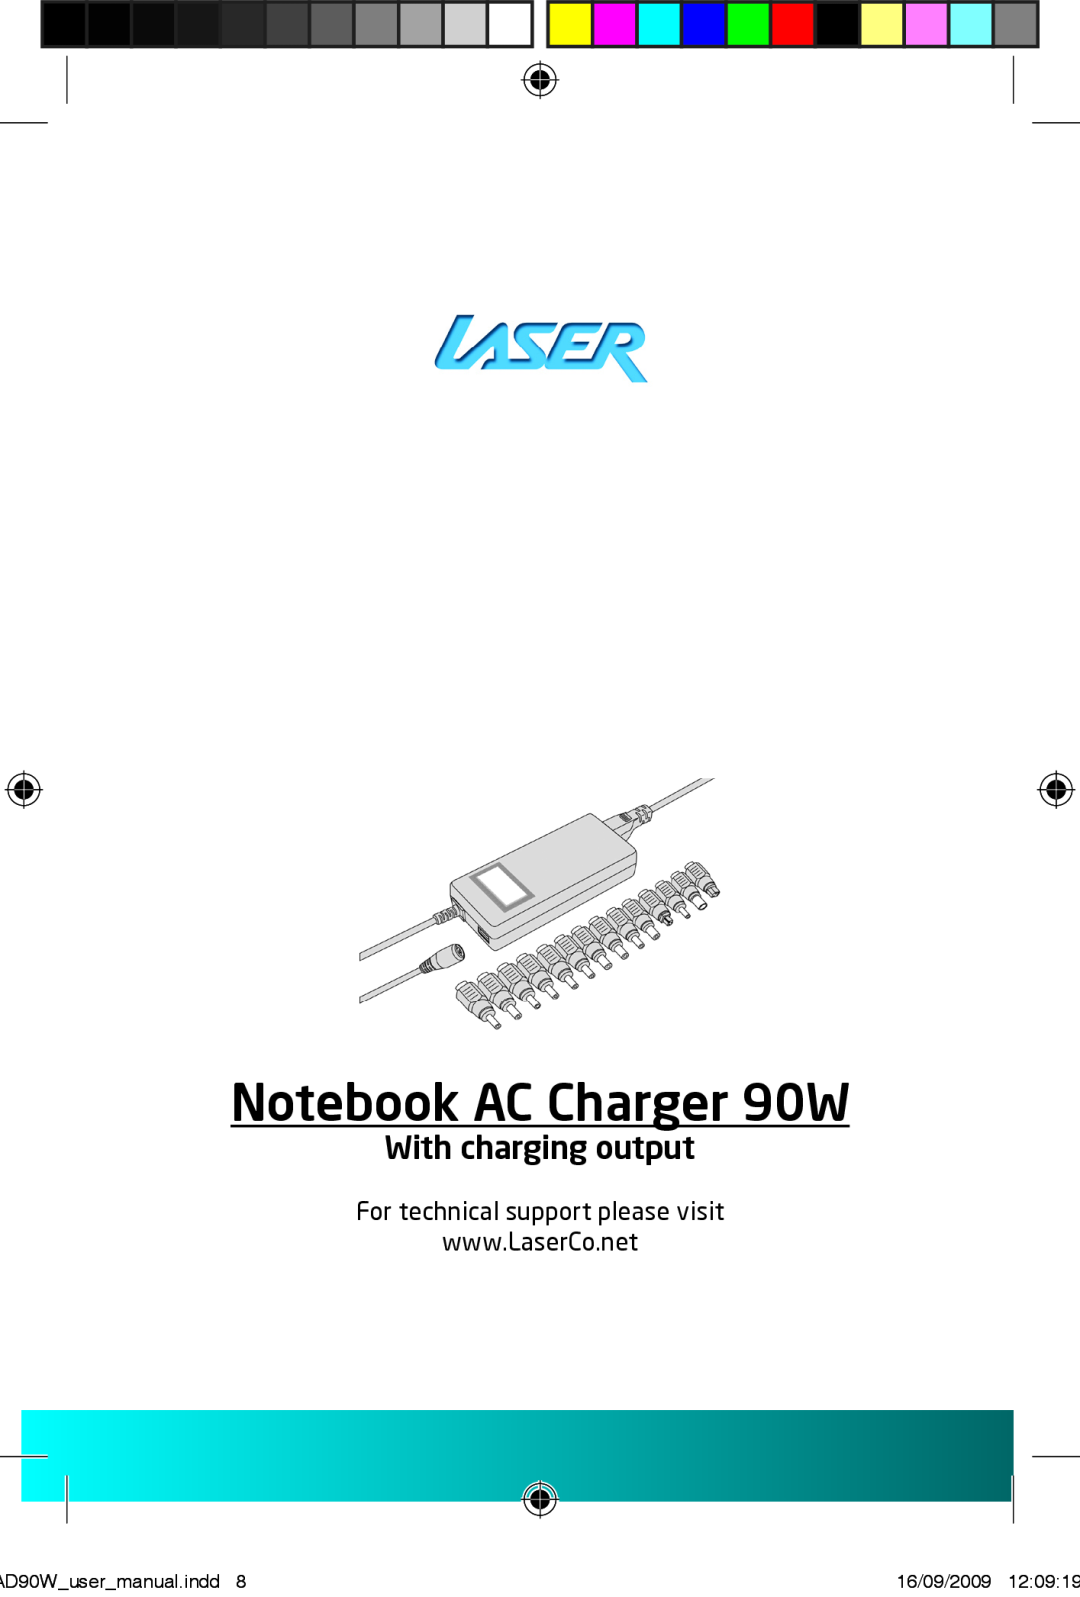 Laser PW-AD90W user manual Notebook AC Charger 90W, With charging output, AD90Wusermanual.indd, 16/09/2009 